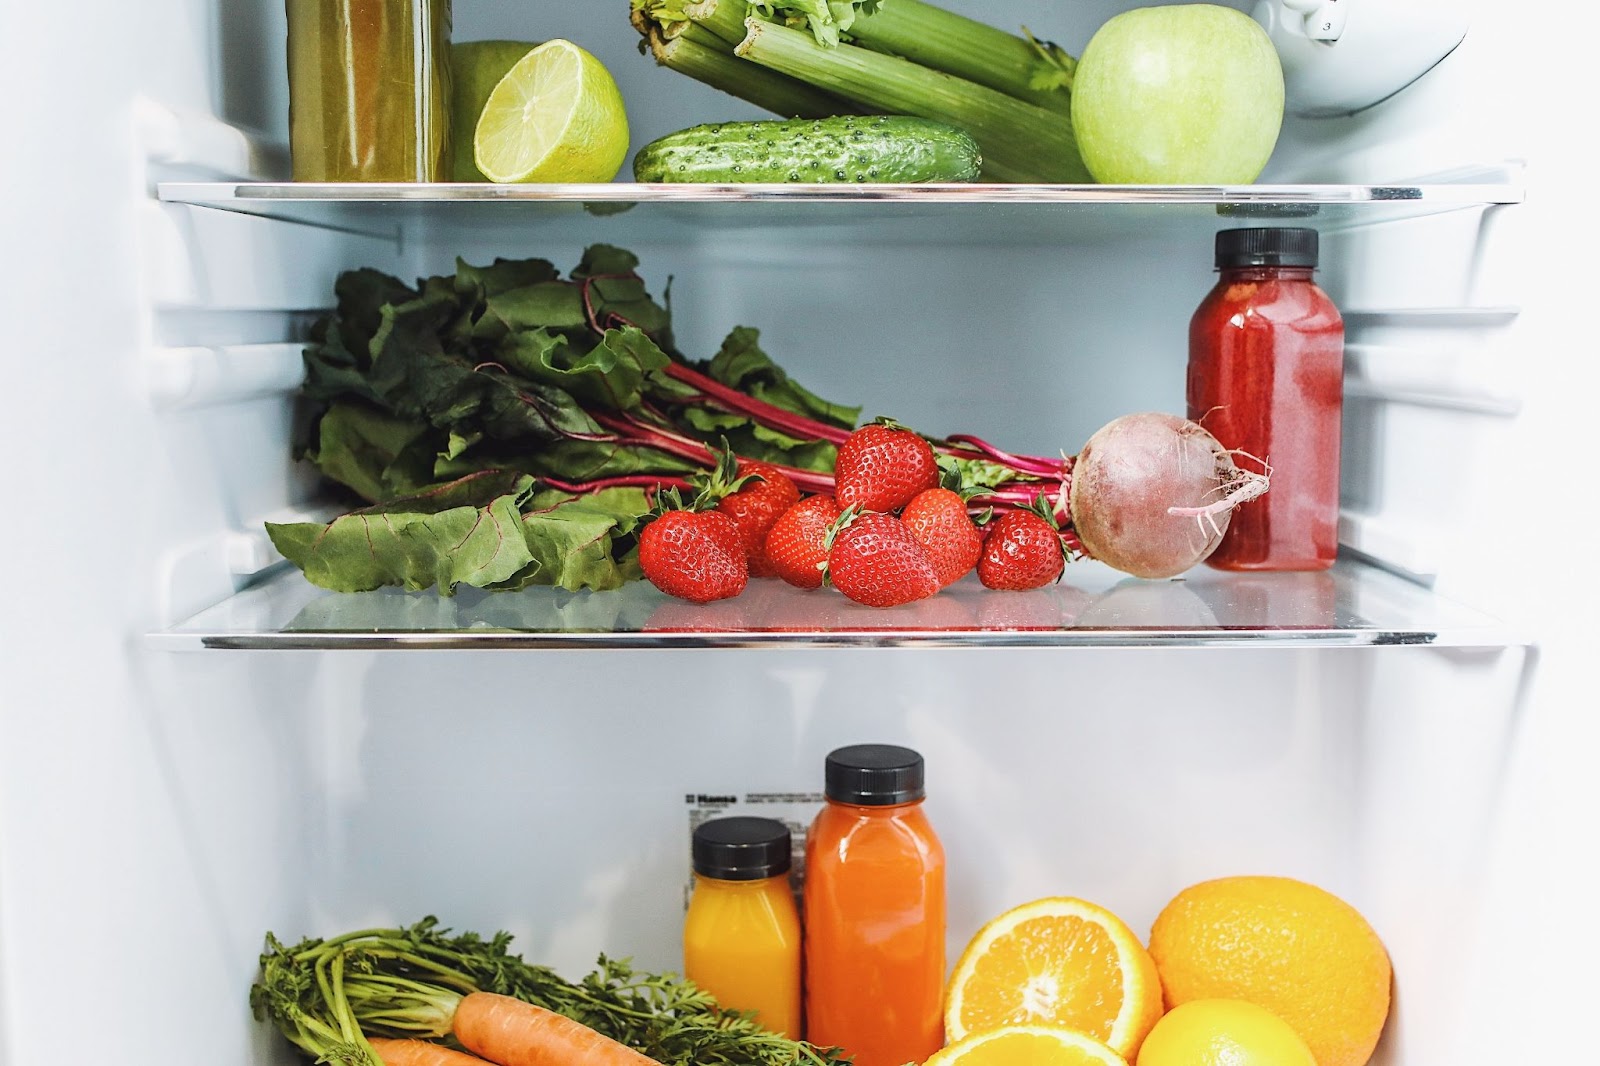 Is Your fridge ready for when you finish your 21 day cleanse?